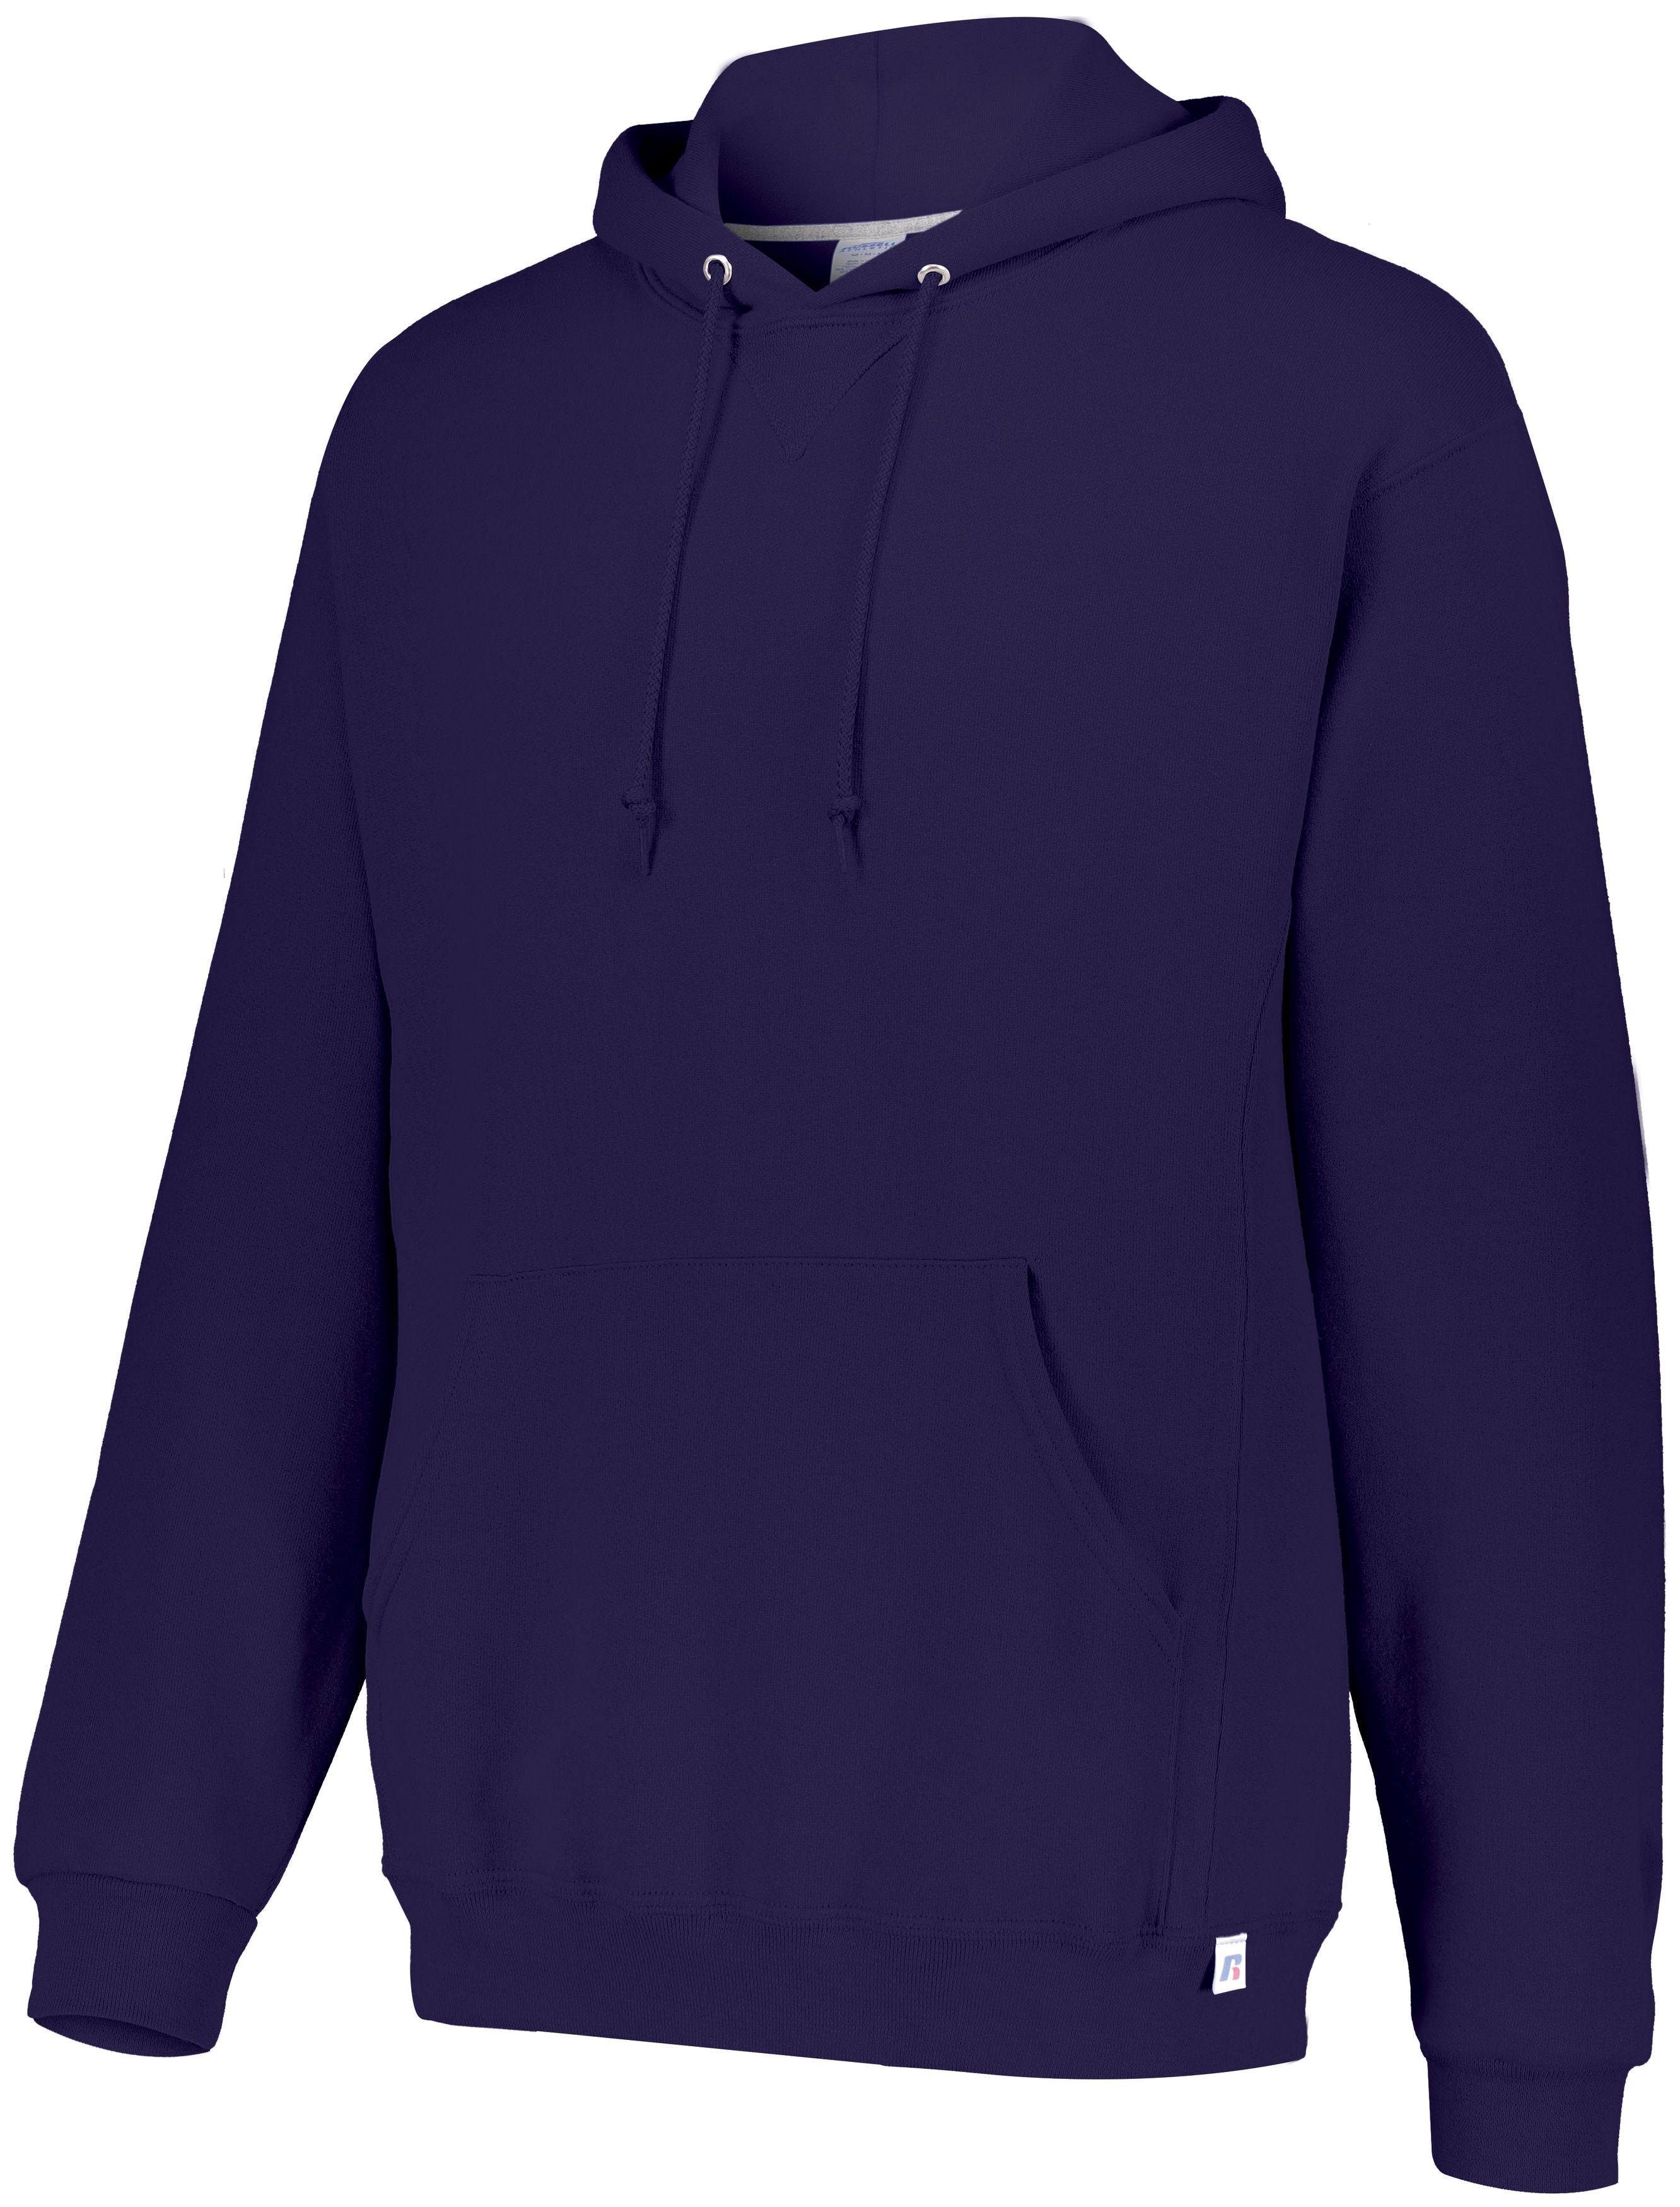 Russell Athletic Dri-Power Fleece Hoodie in Purple  -Part of the Adult, Russell-Athletic-Products, Shirts product lines at KanaleyCreations.com